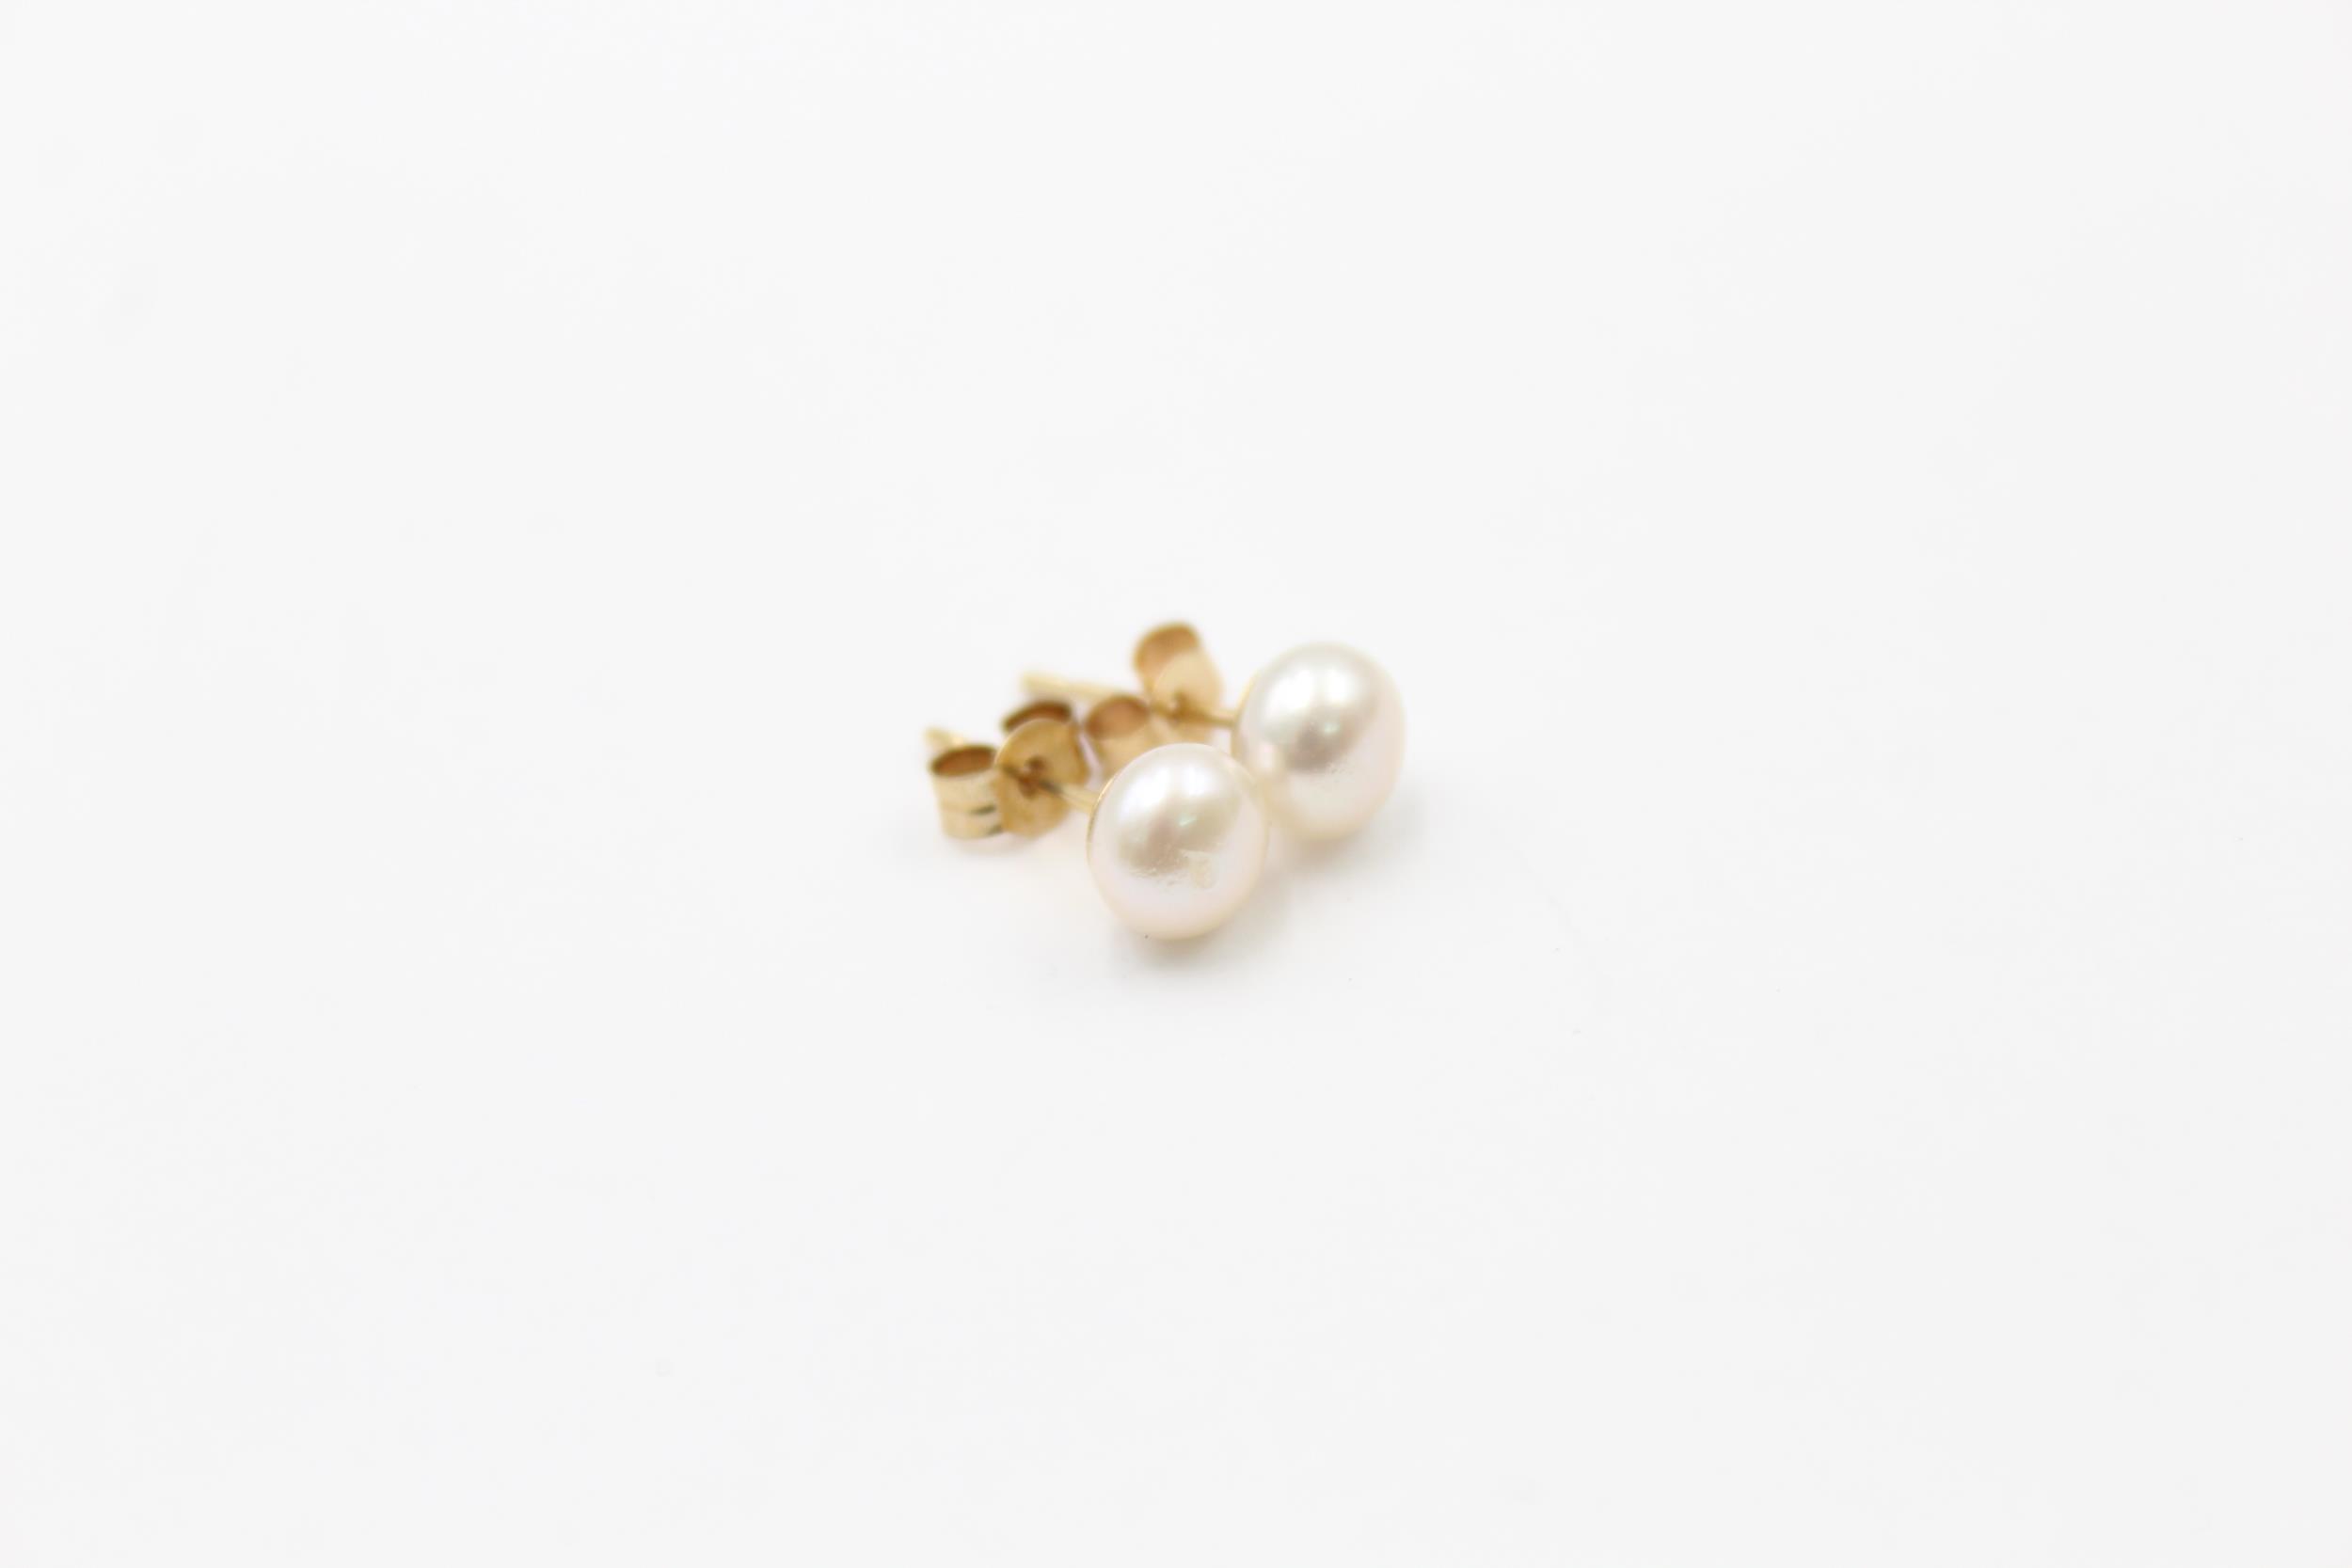 3 x 9ct gold paired pearl stud earrings (4.6g) - Image 6 of 6